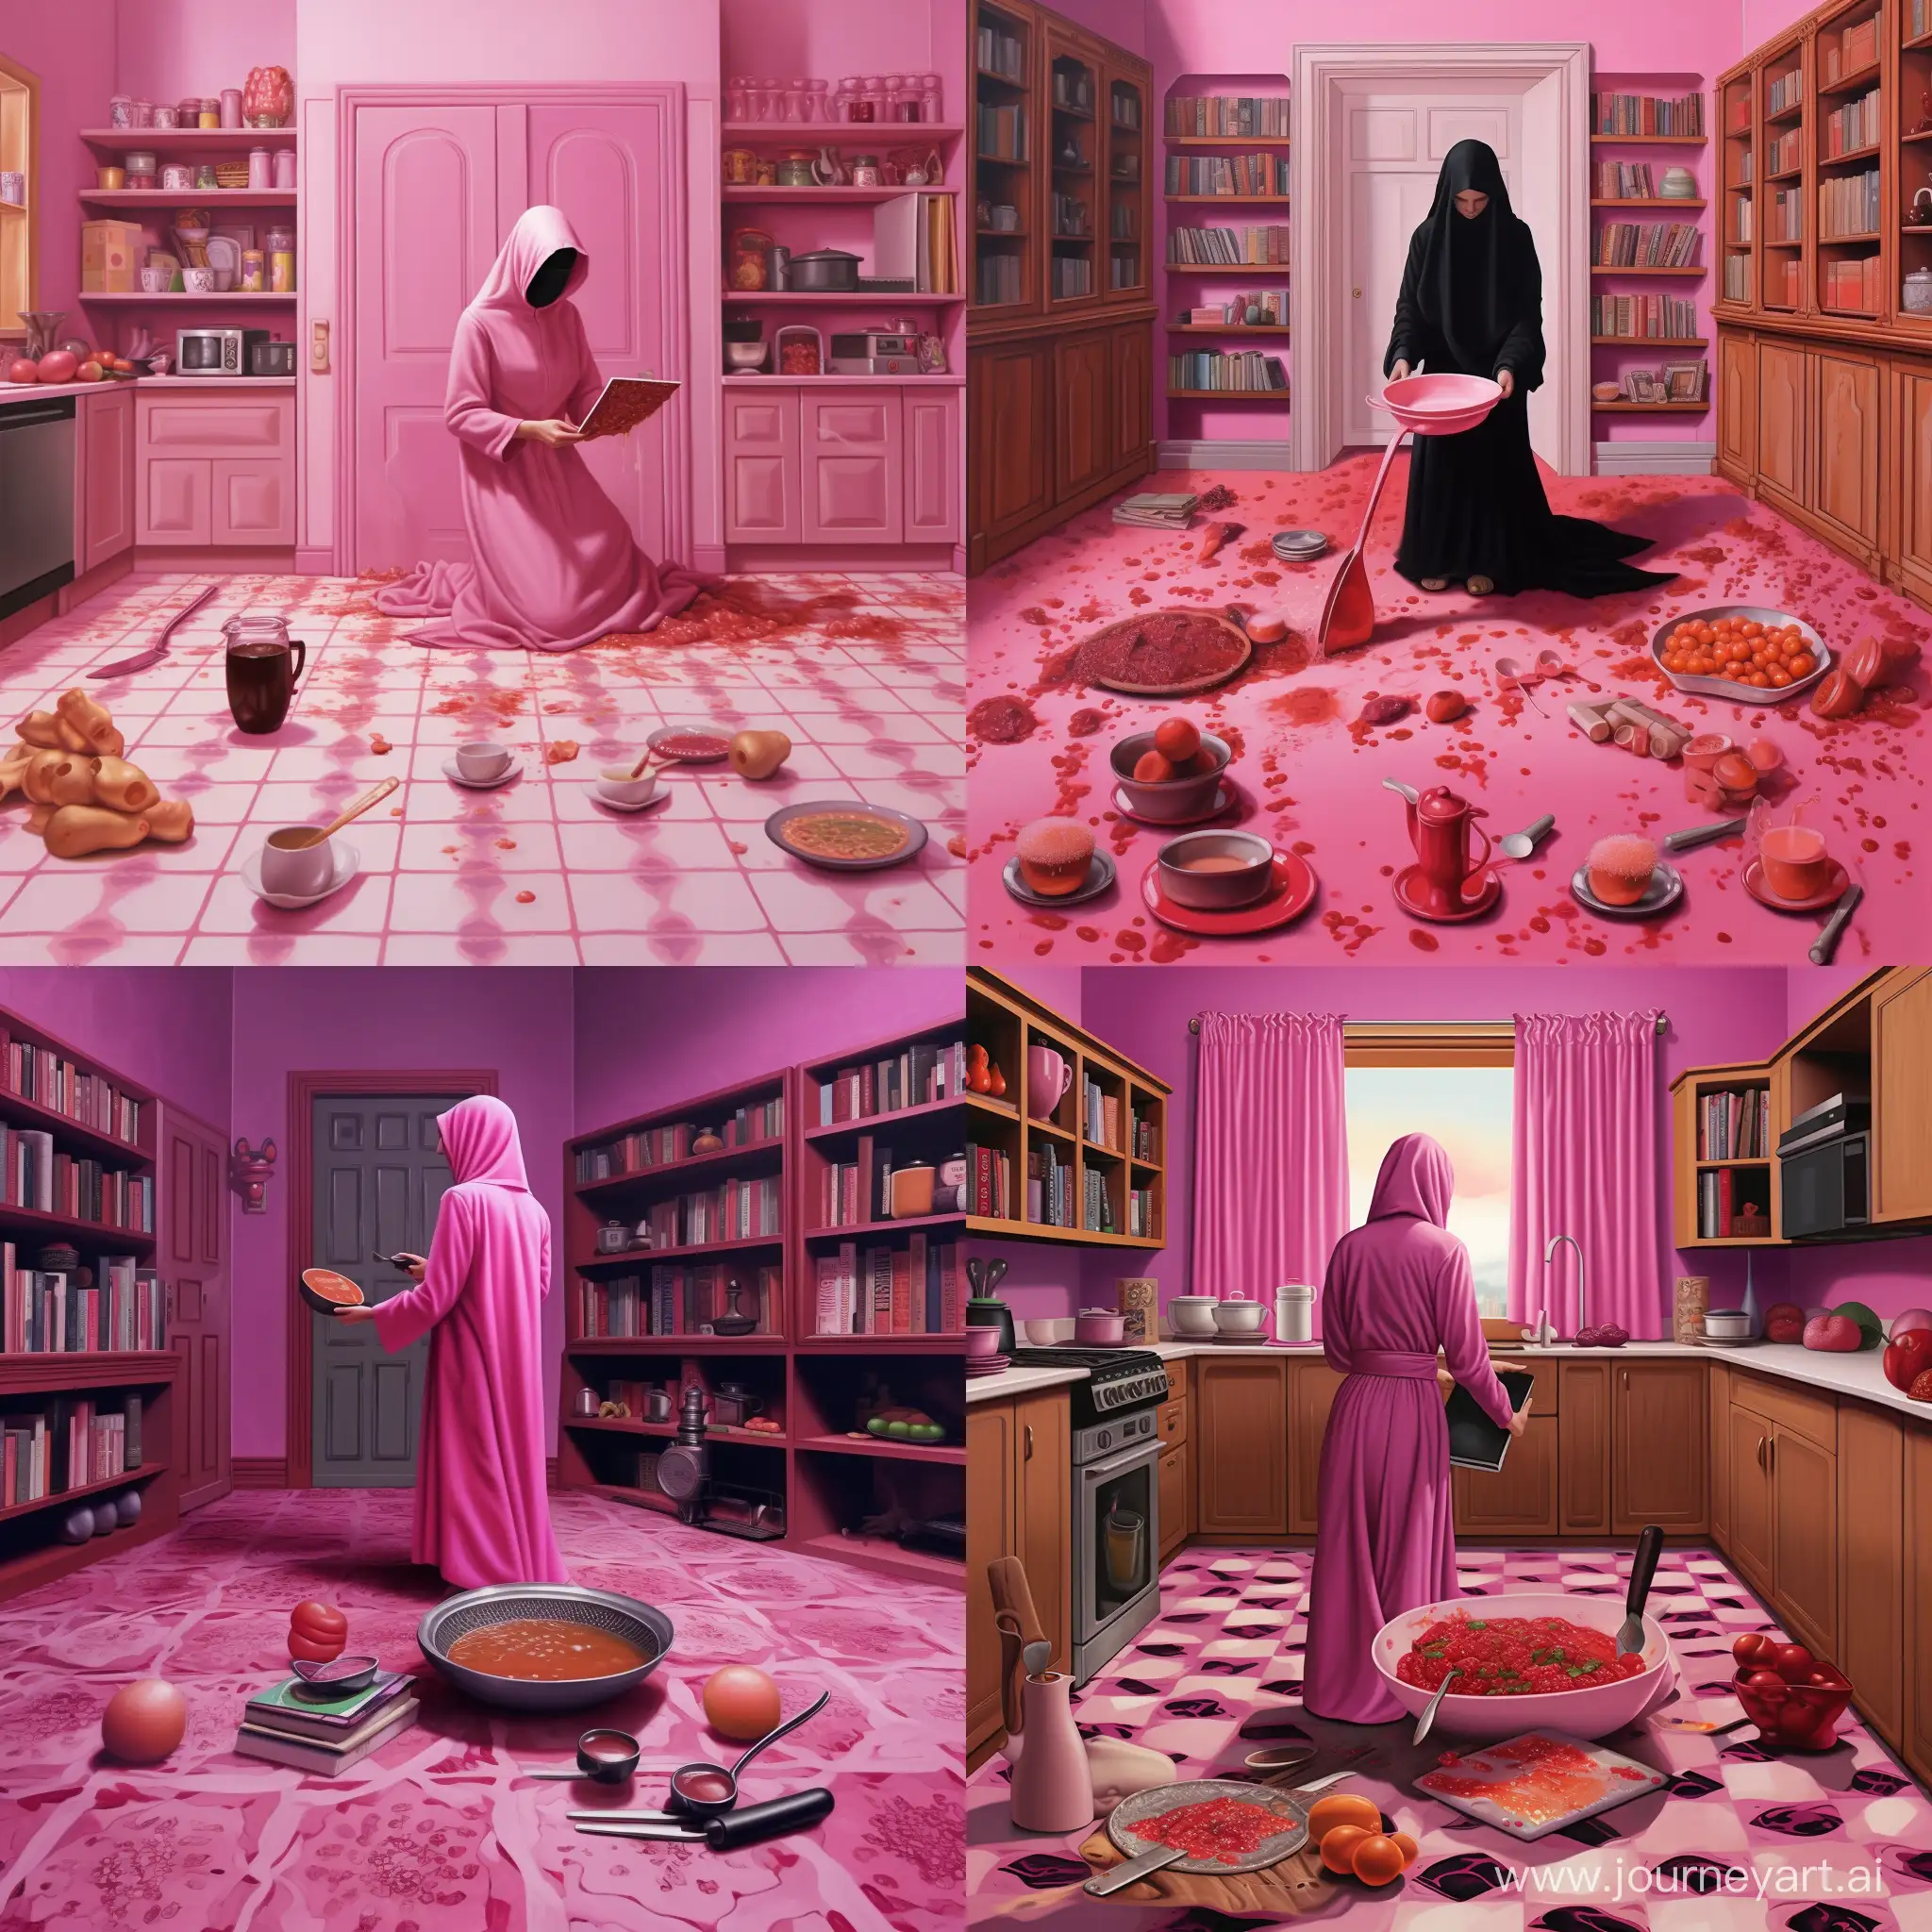 Pink-Burqa-Pastry-Chef-Mixing-in-Pink-Room